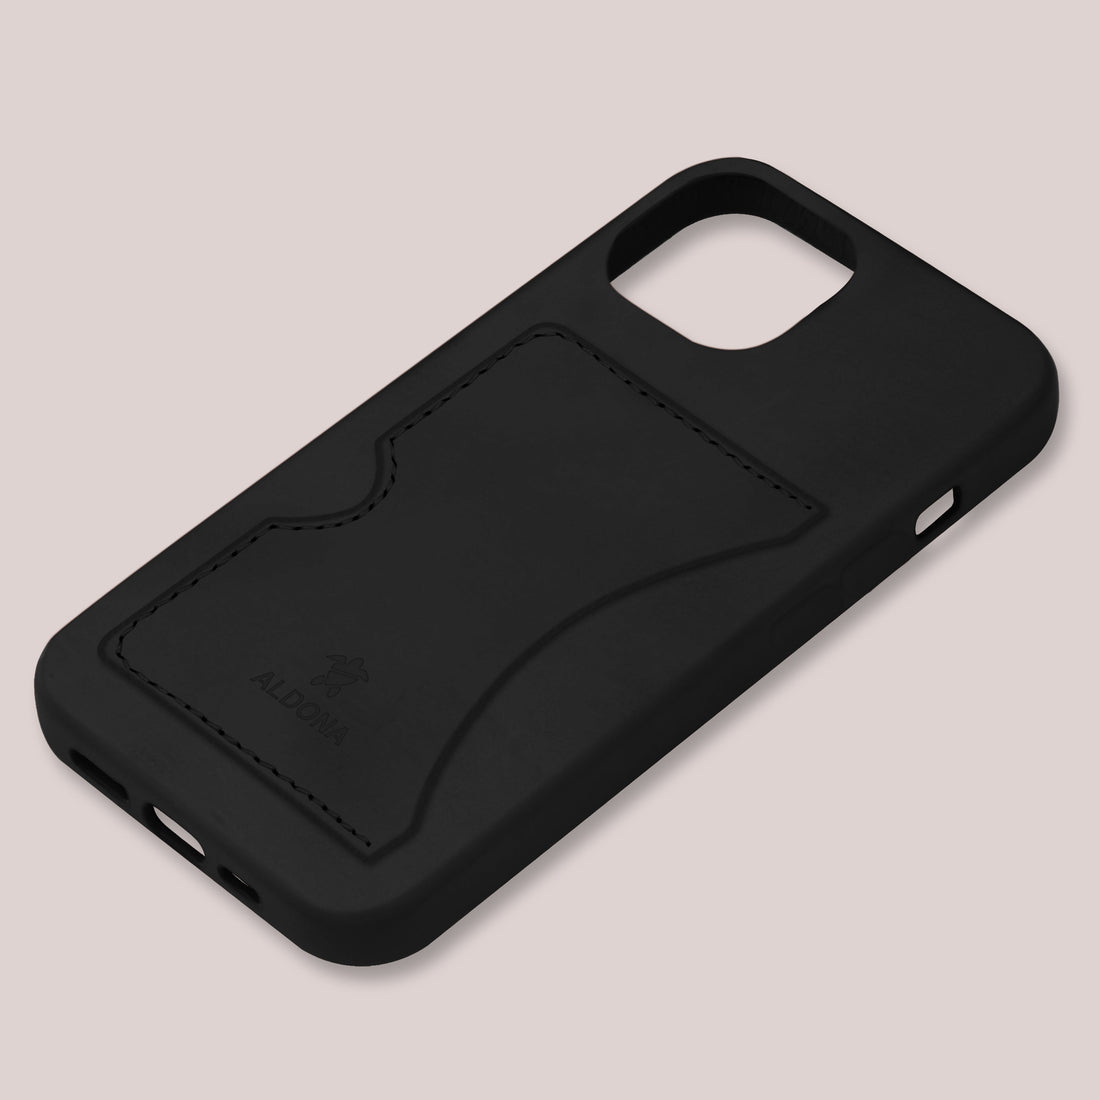 Baxter Card Case for iPhone 12 Pro - Onyx Black